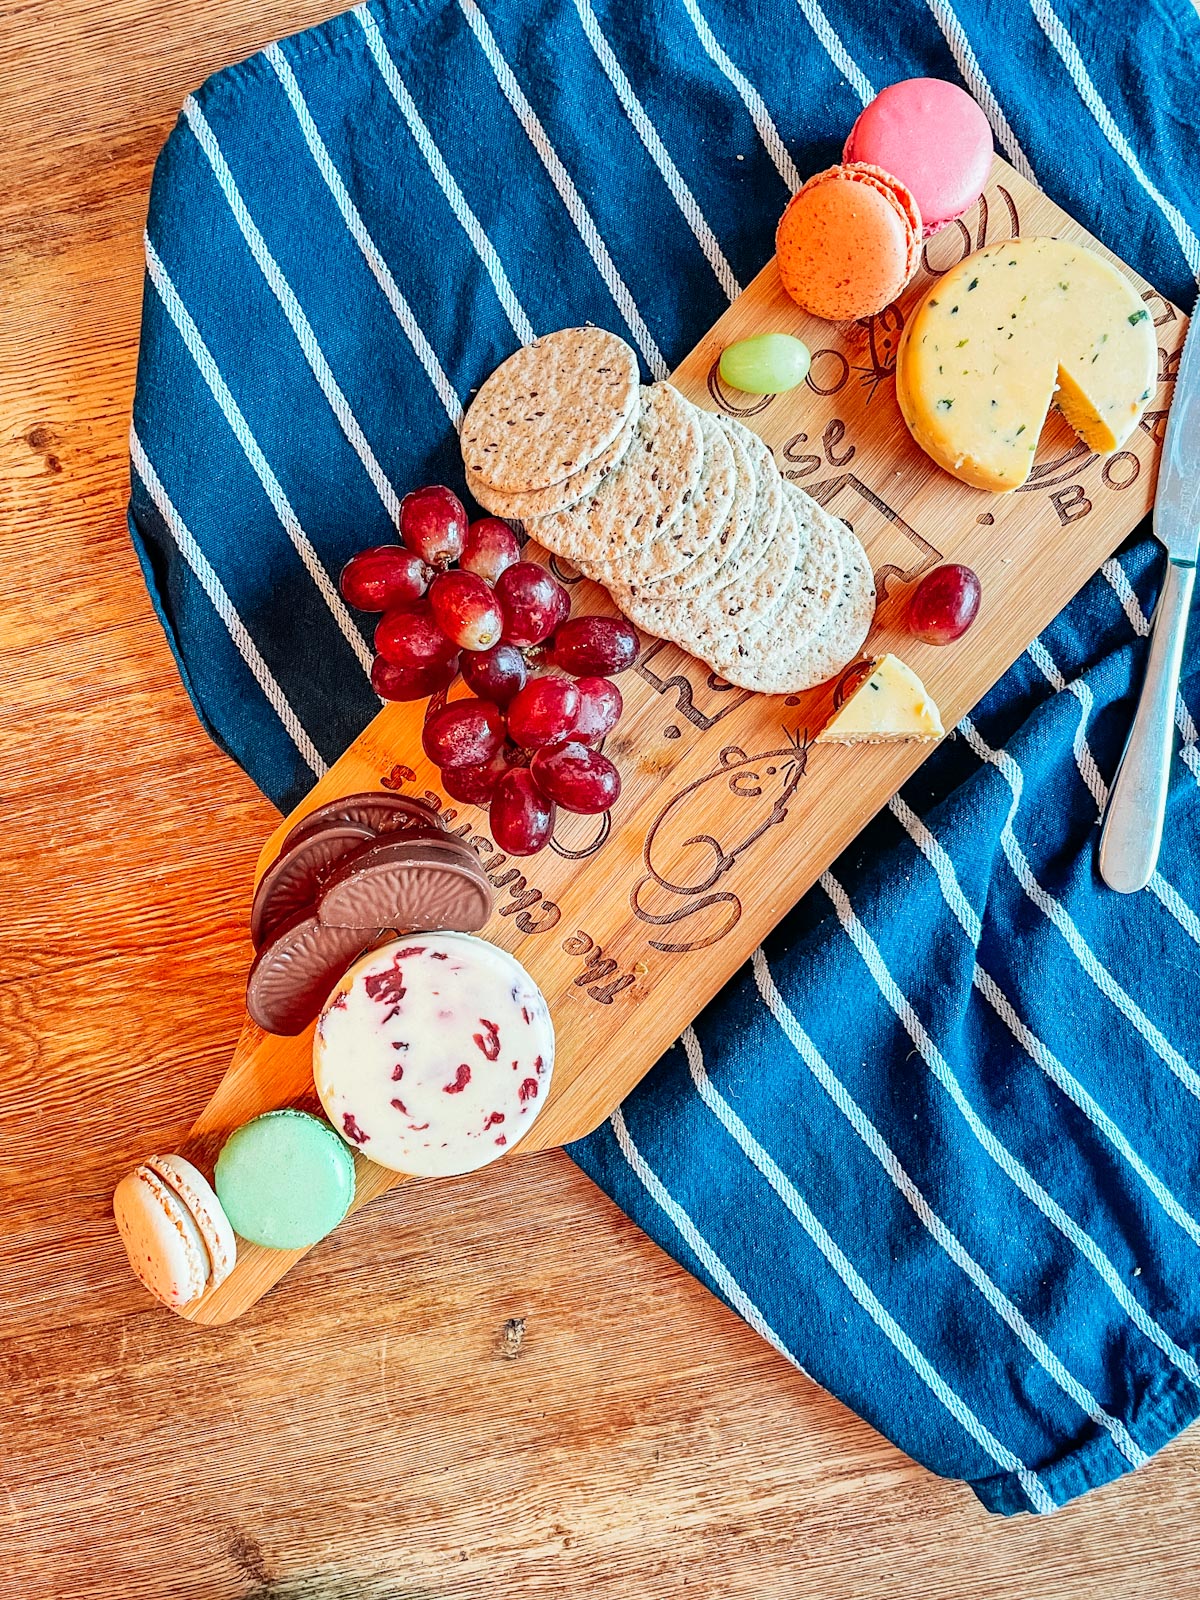 How to make a personalised cheese Board